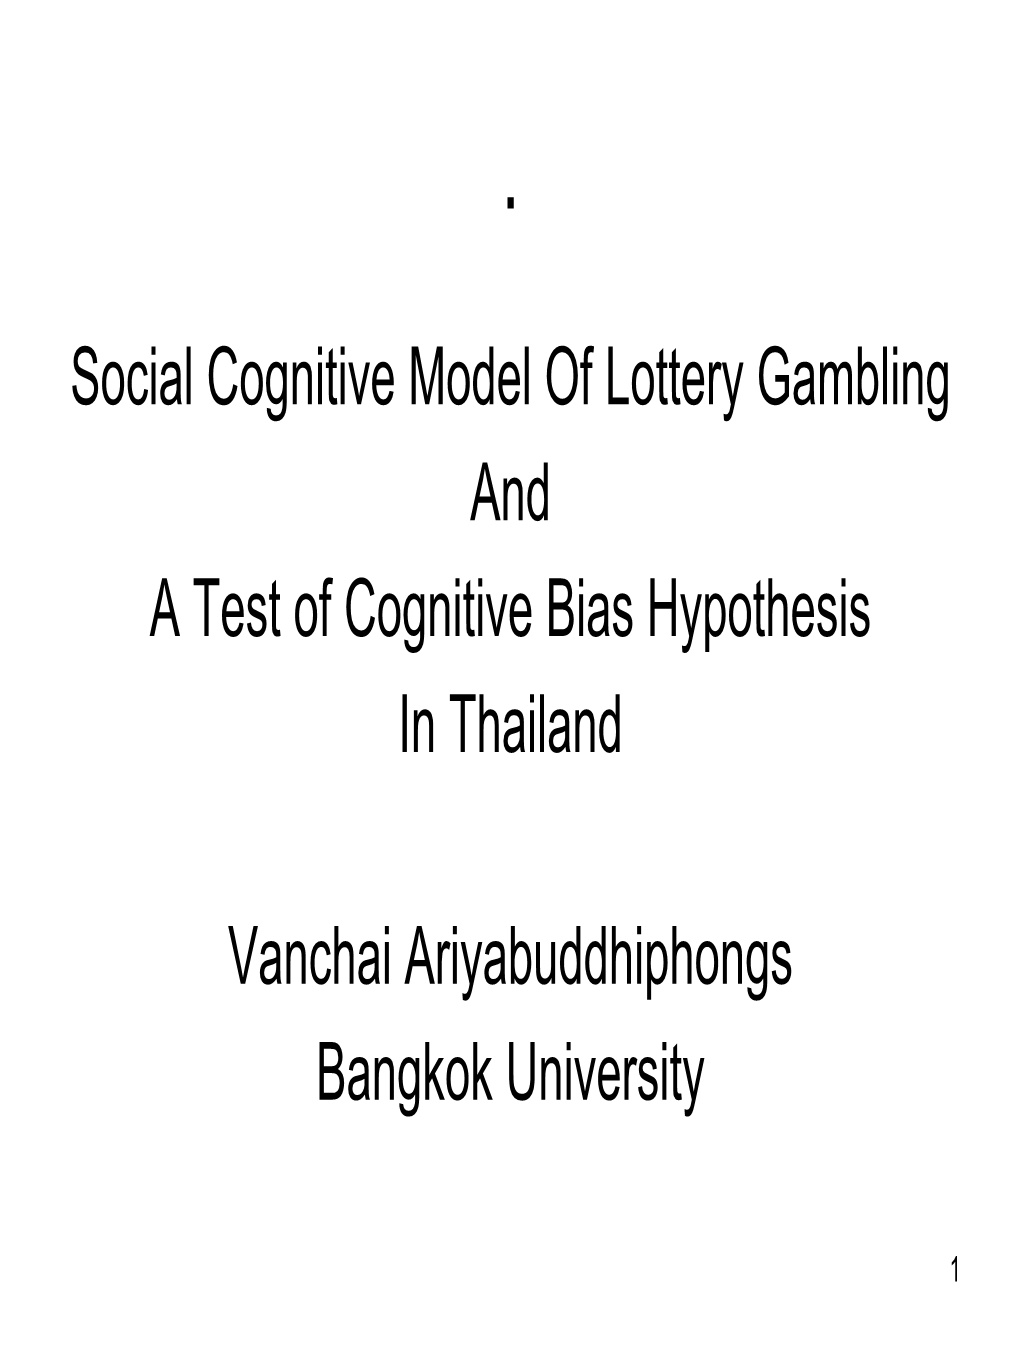 Social Cognitive Model of Lottery Gambling and a Test of Cognitive Bias Hypothesis in Thailand